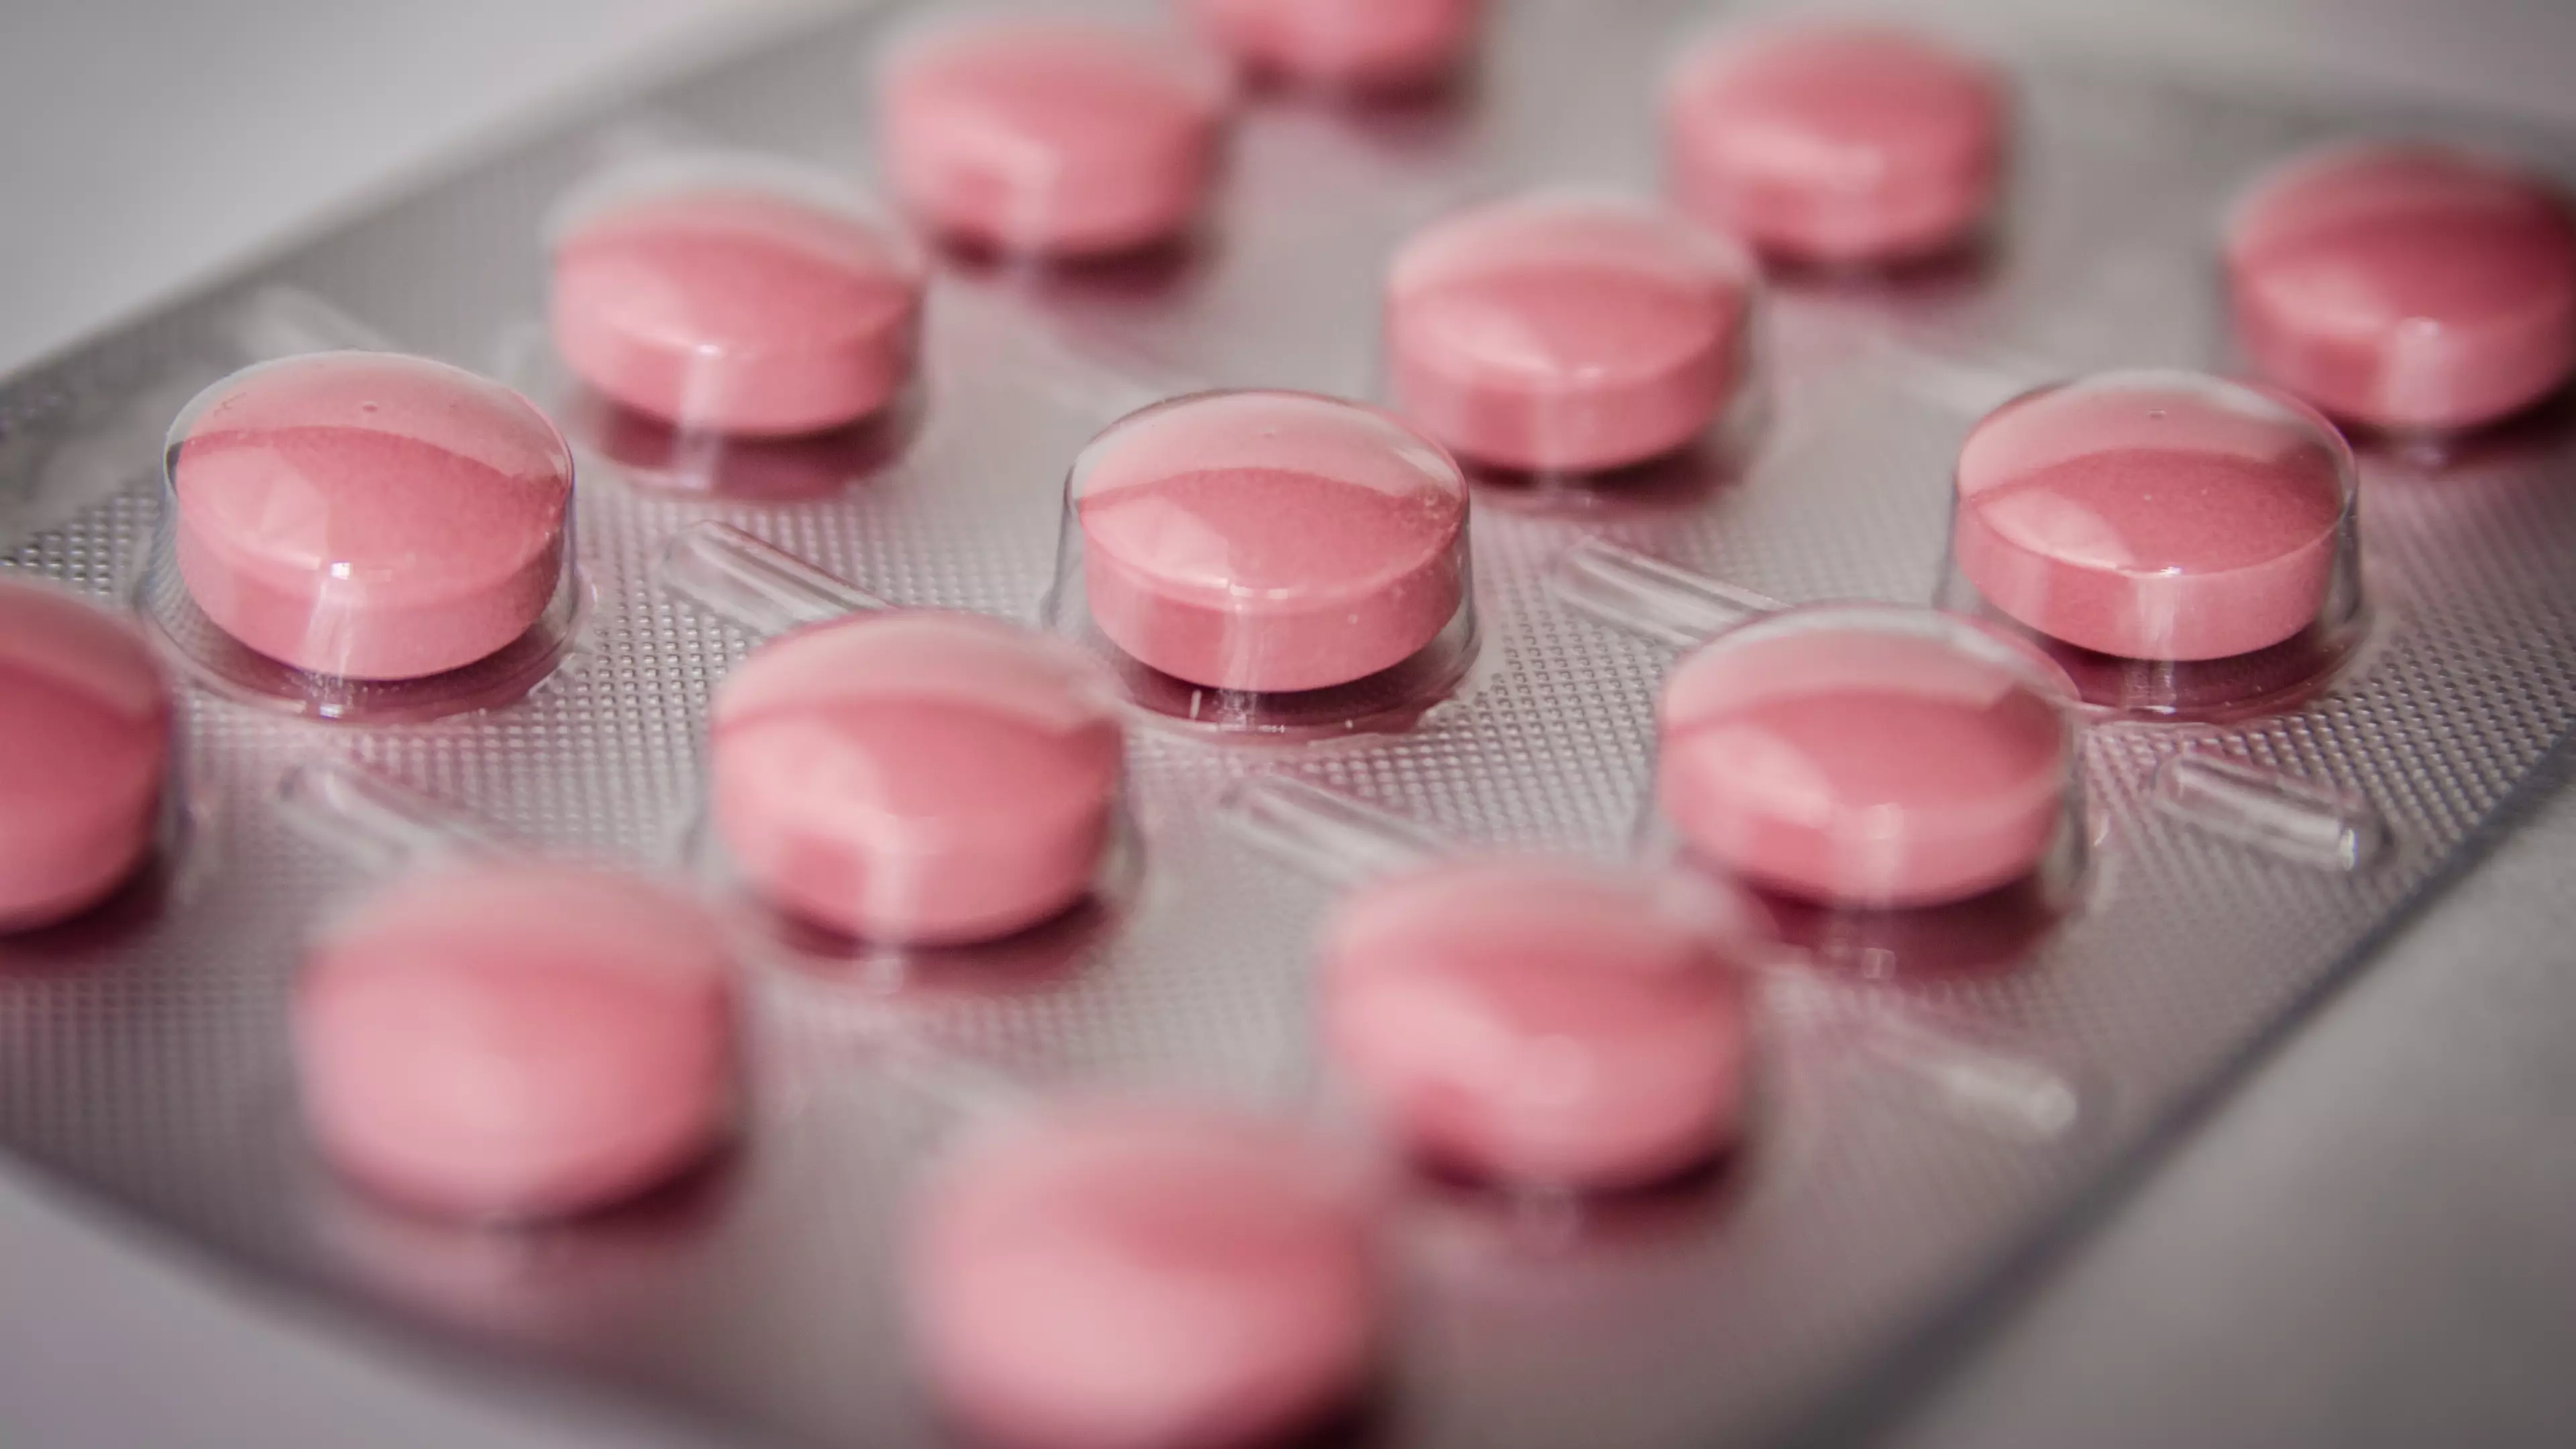 These Common Misconceptions About The Pill Could Be Affecting Your Health